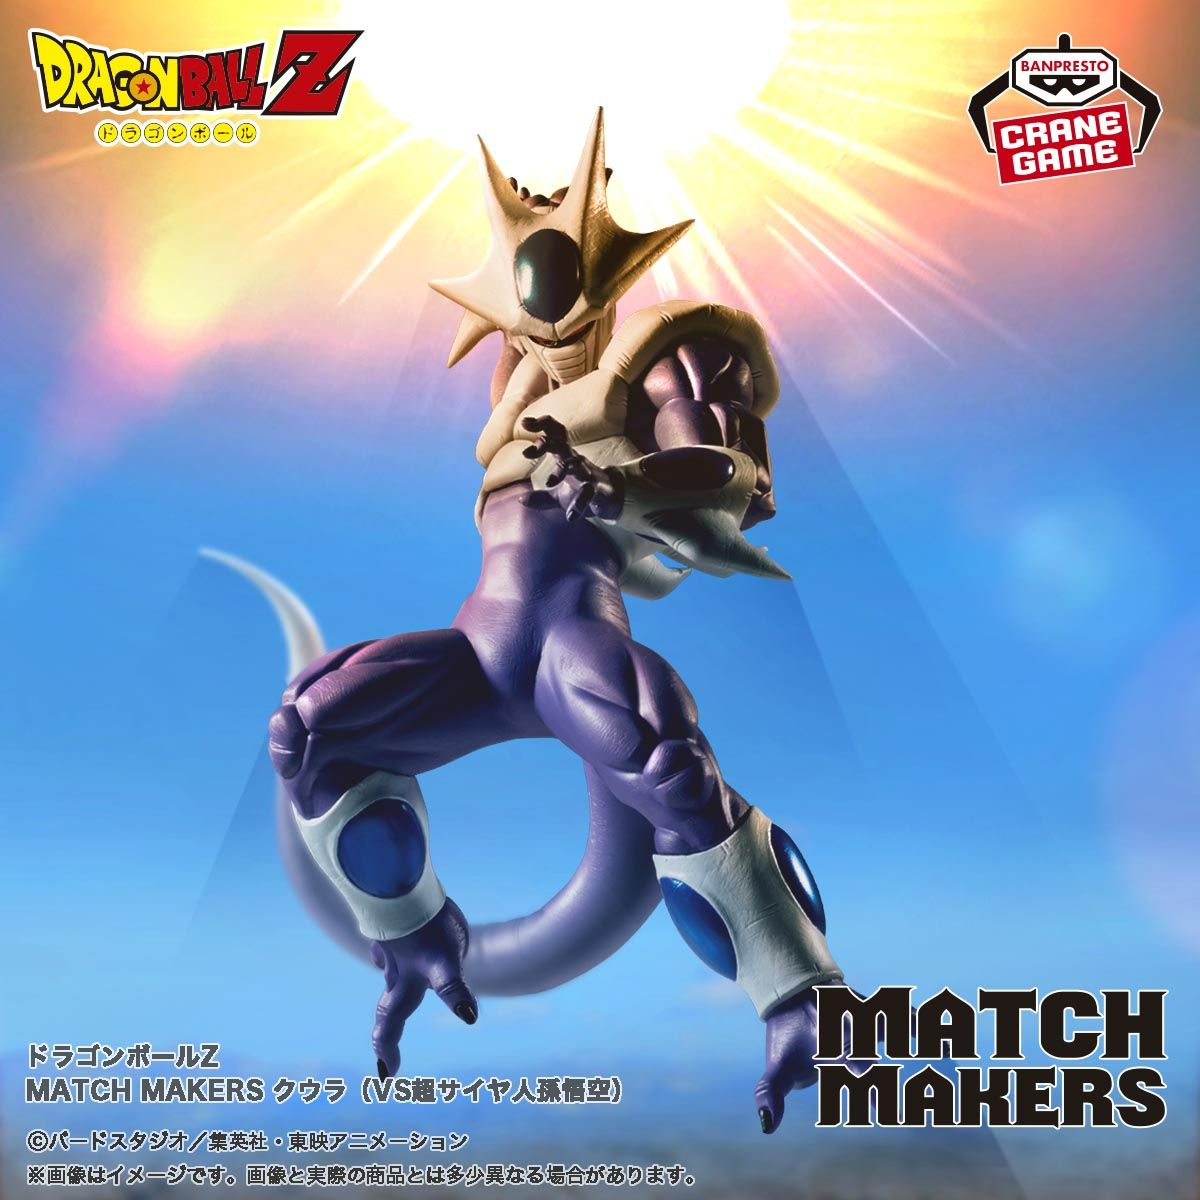 The Latest Release from the MATCH MAKERS Series Is Coming!